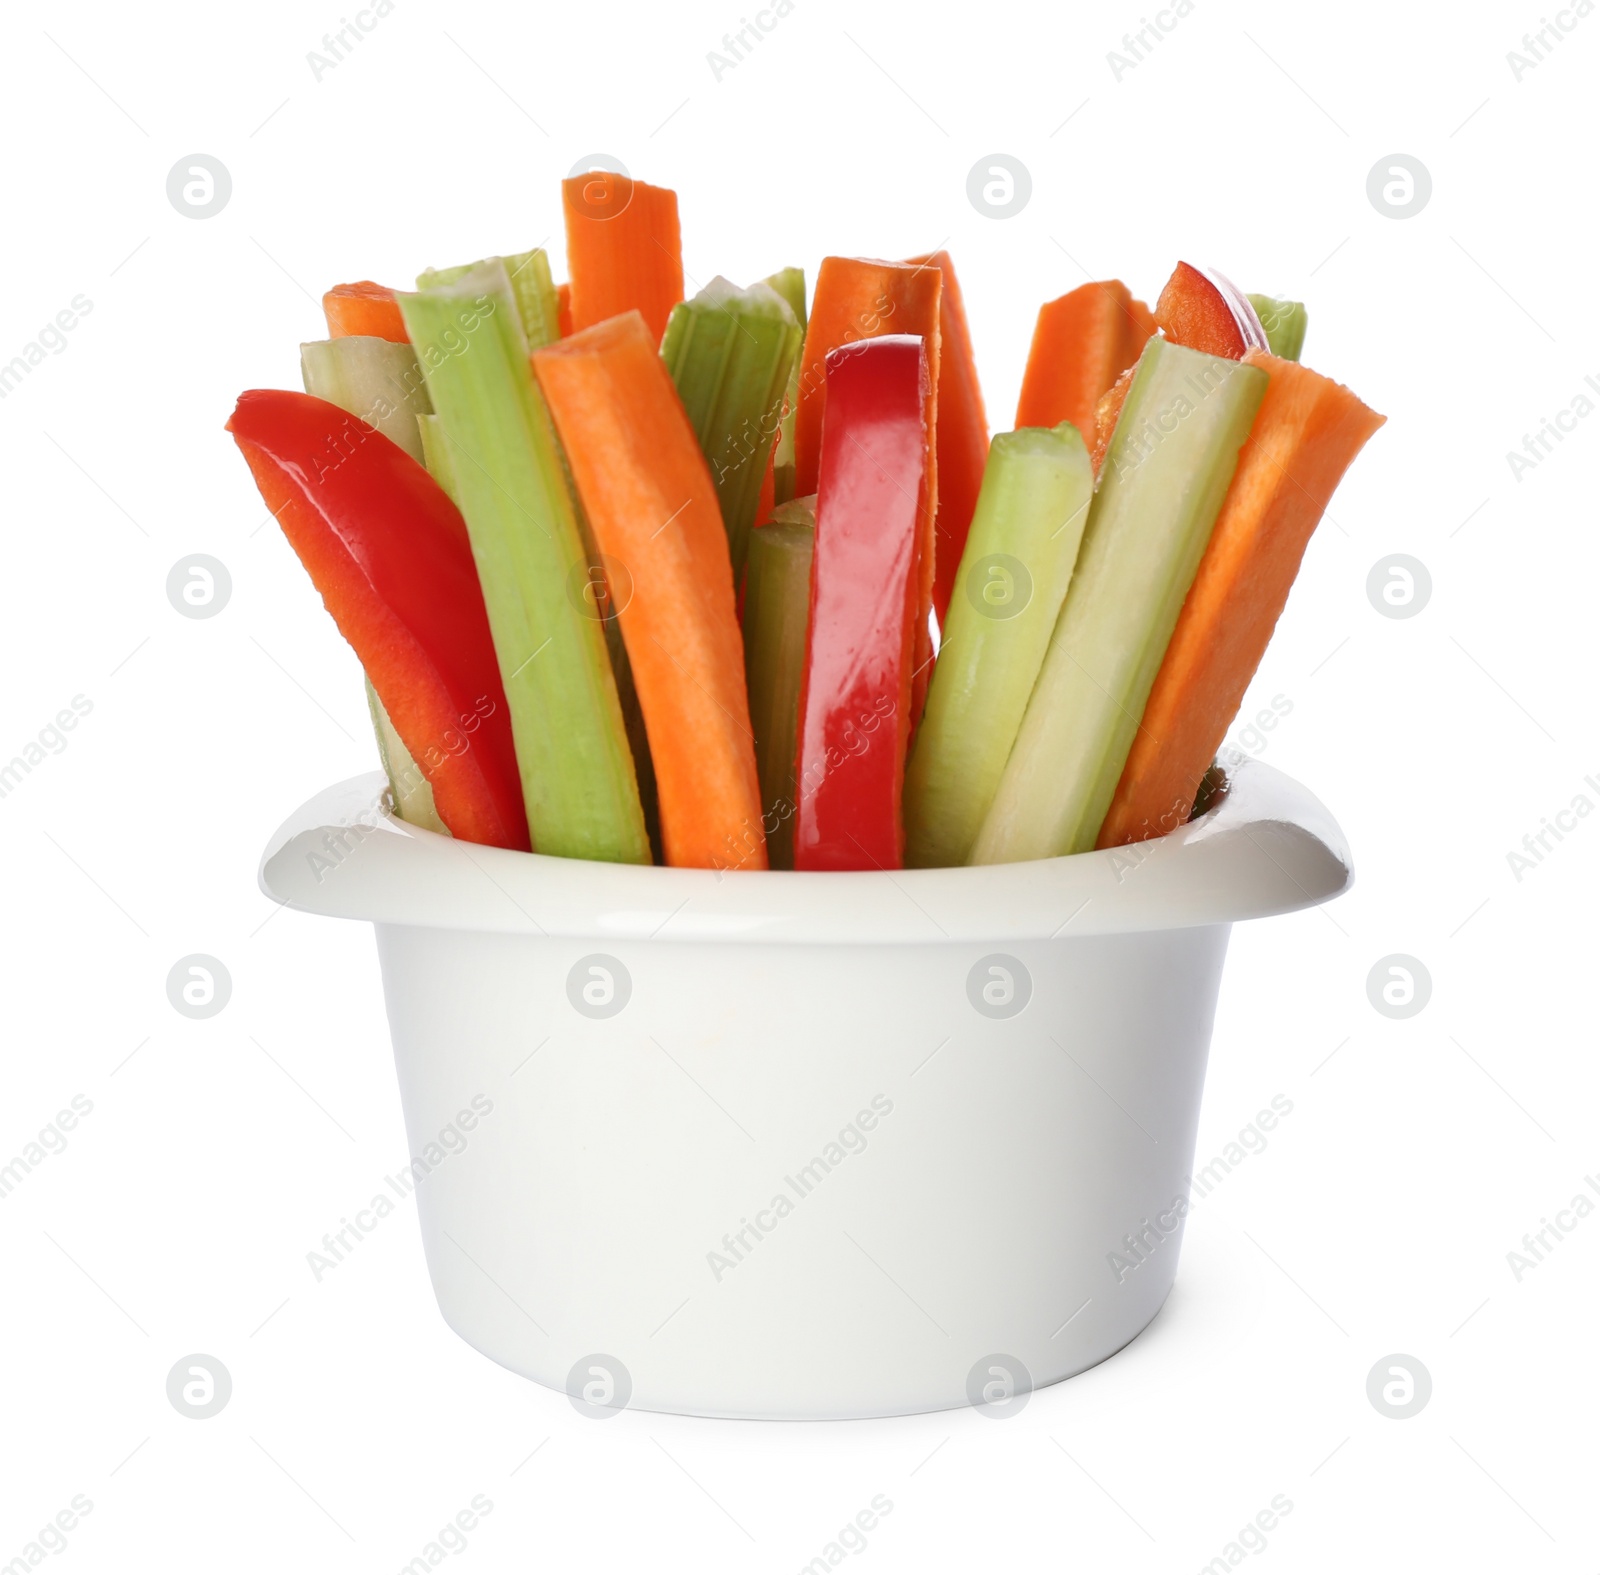 Photo of Celery and other vegetable sticks in bowl isolated on white